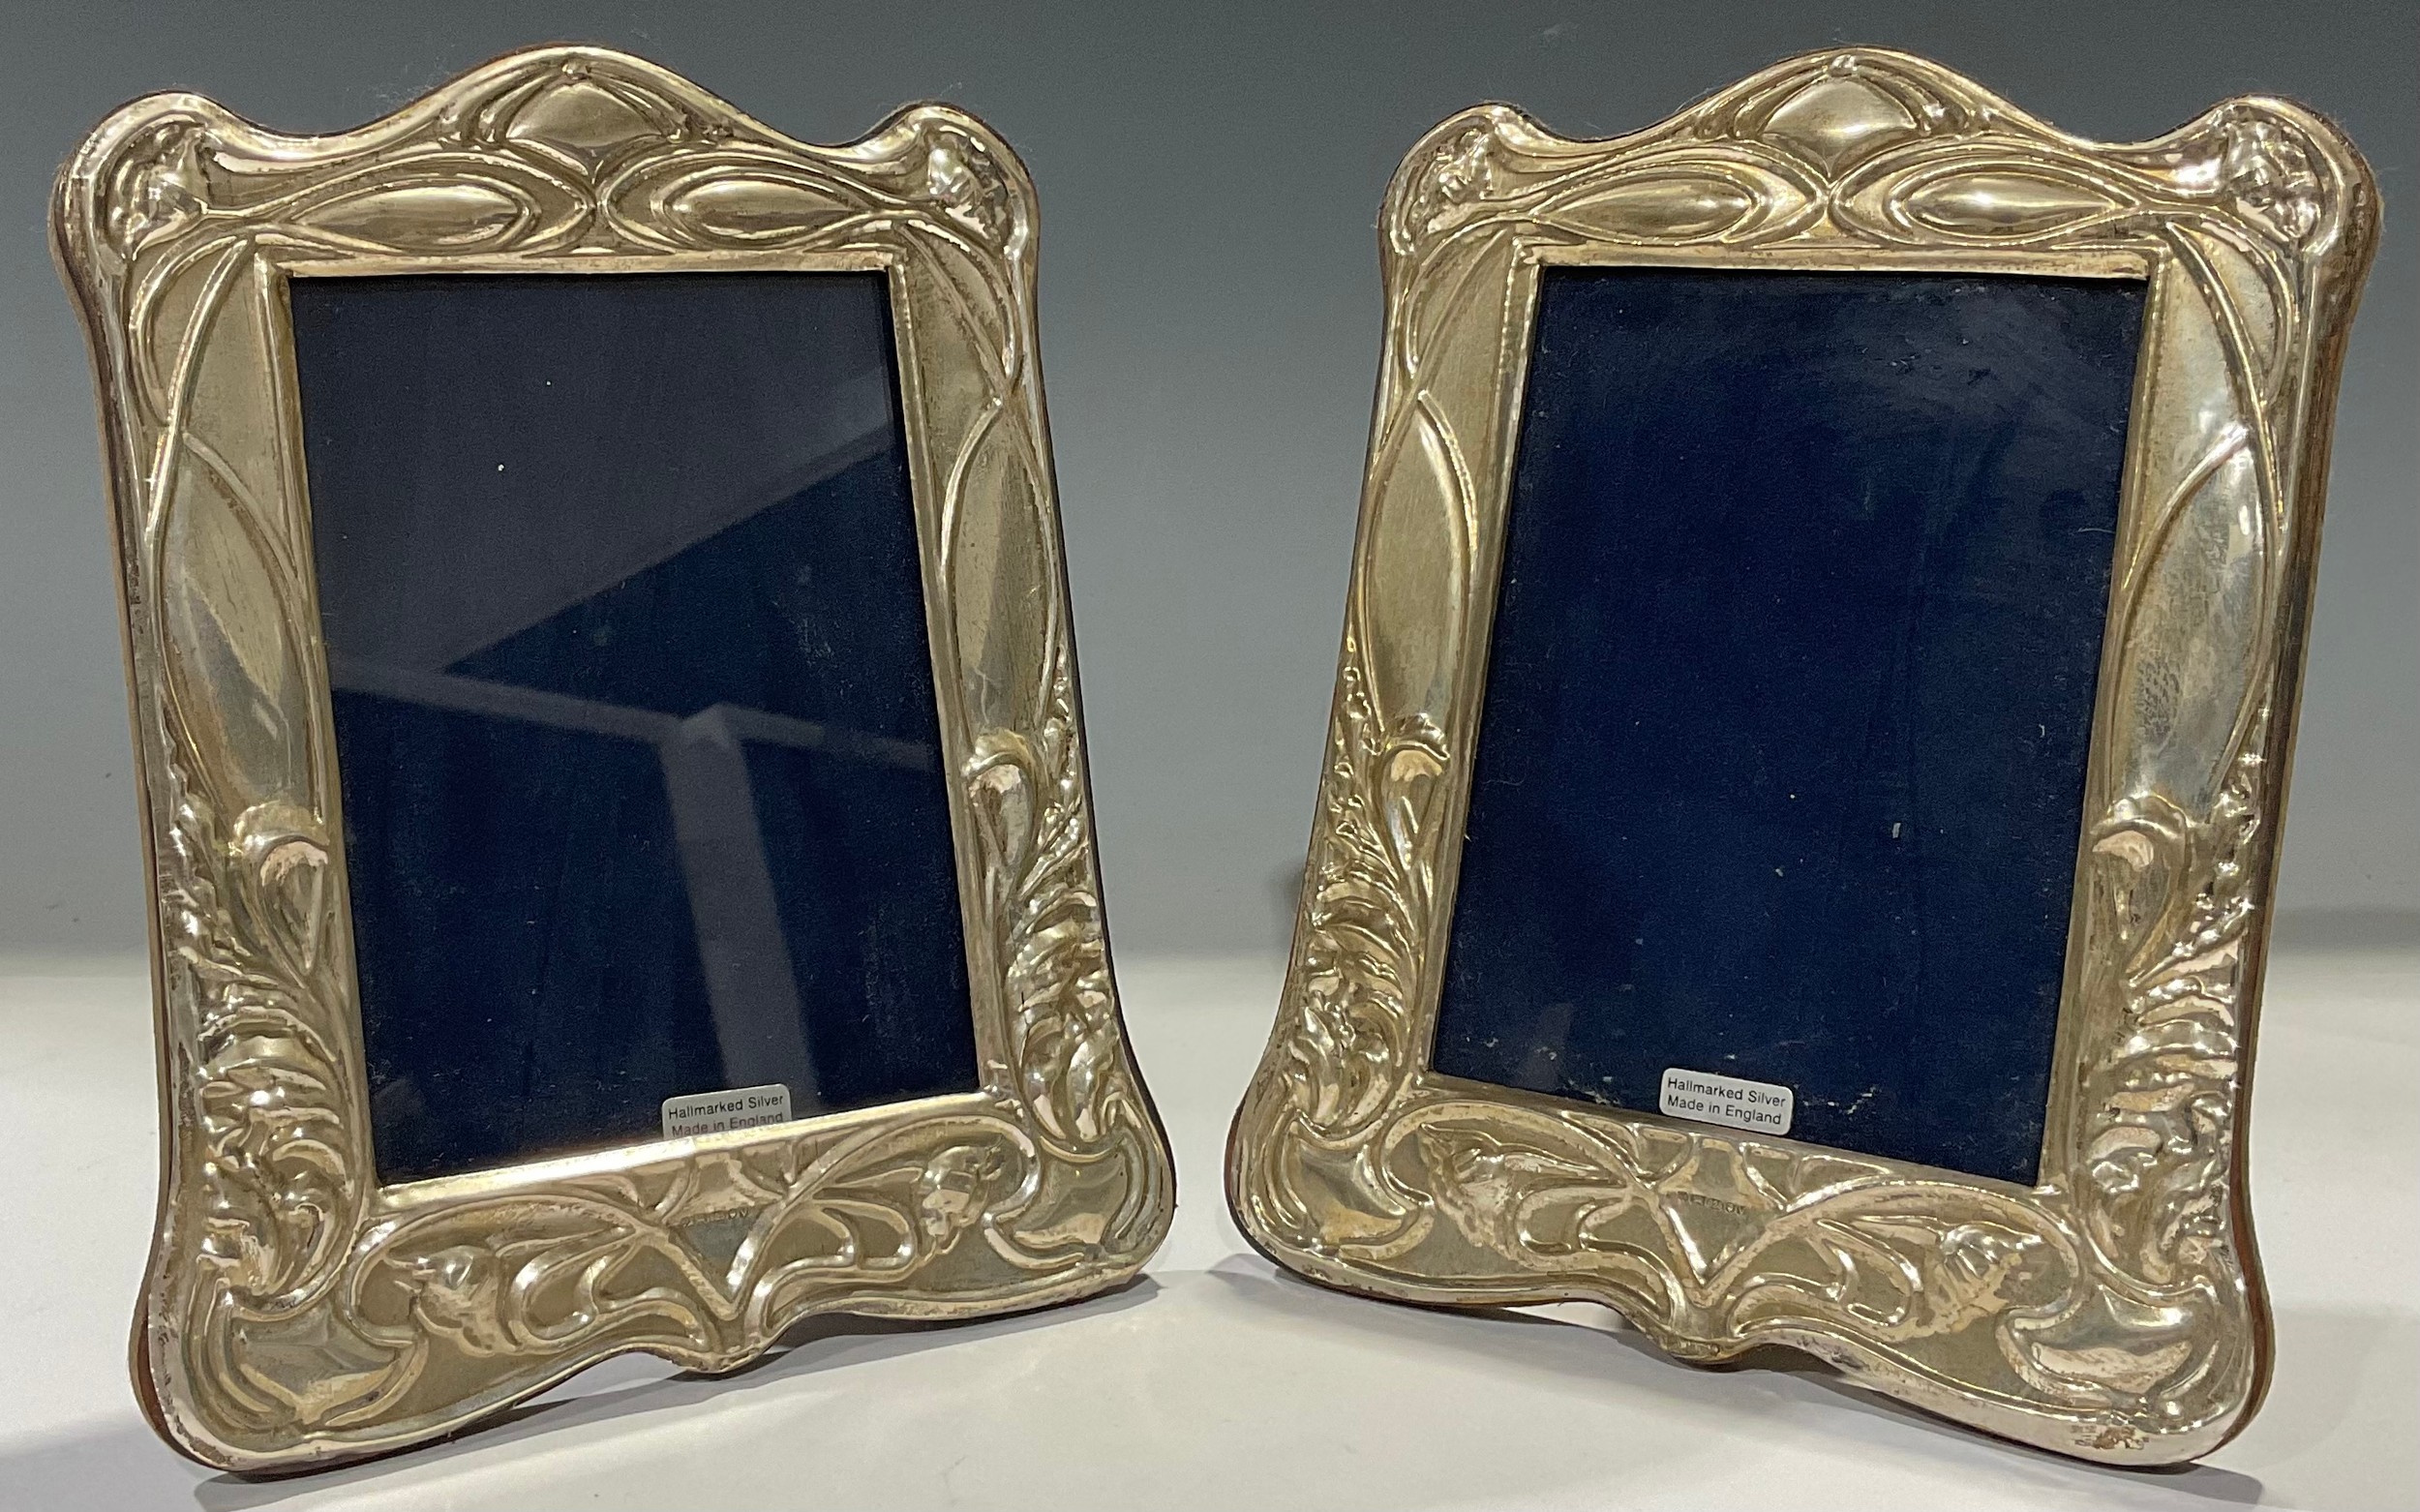 A pair of Elizabeth II silver Art Nouveau style arched easel photograph frames, embossed with